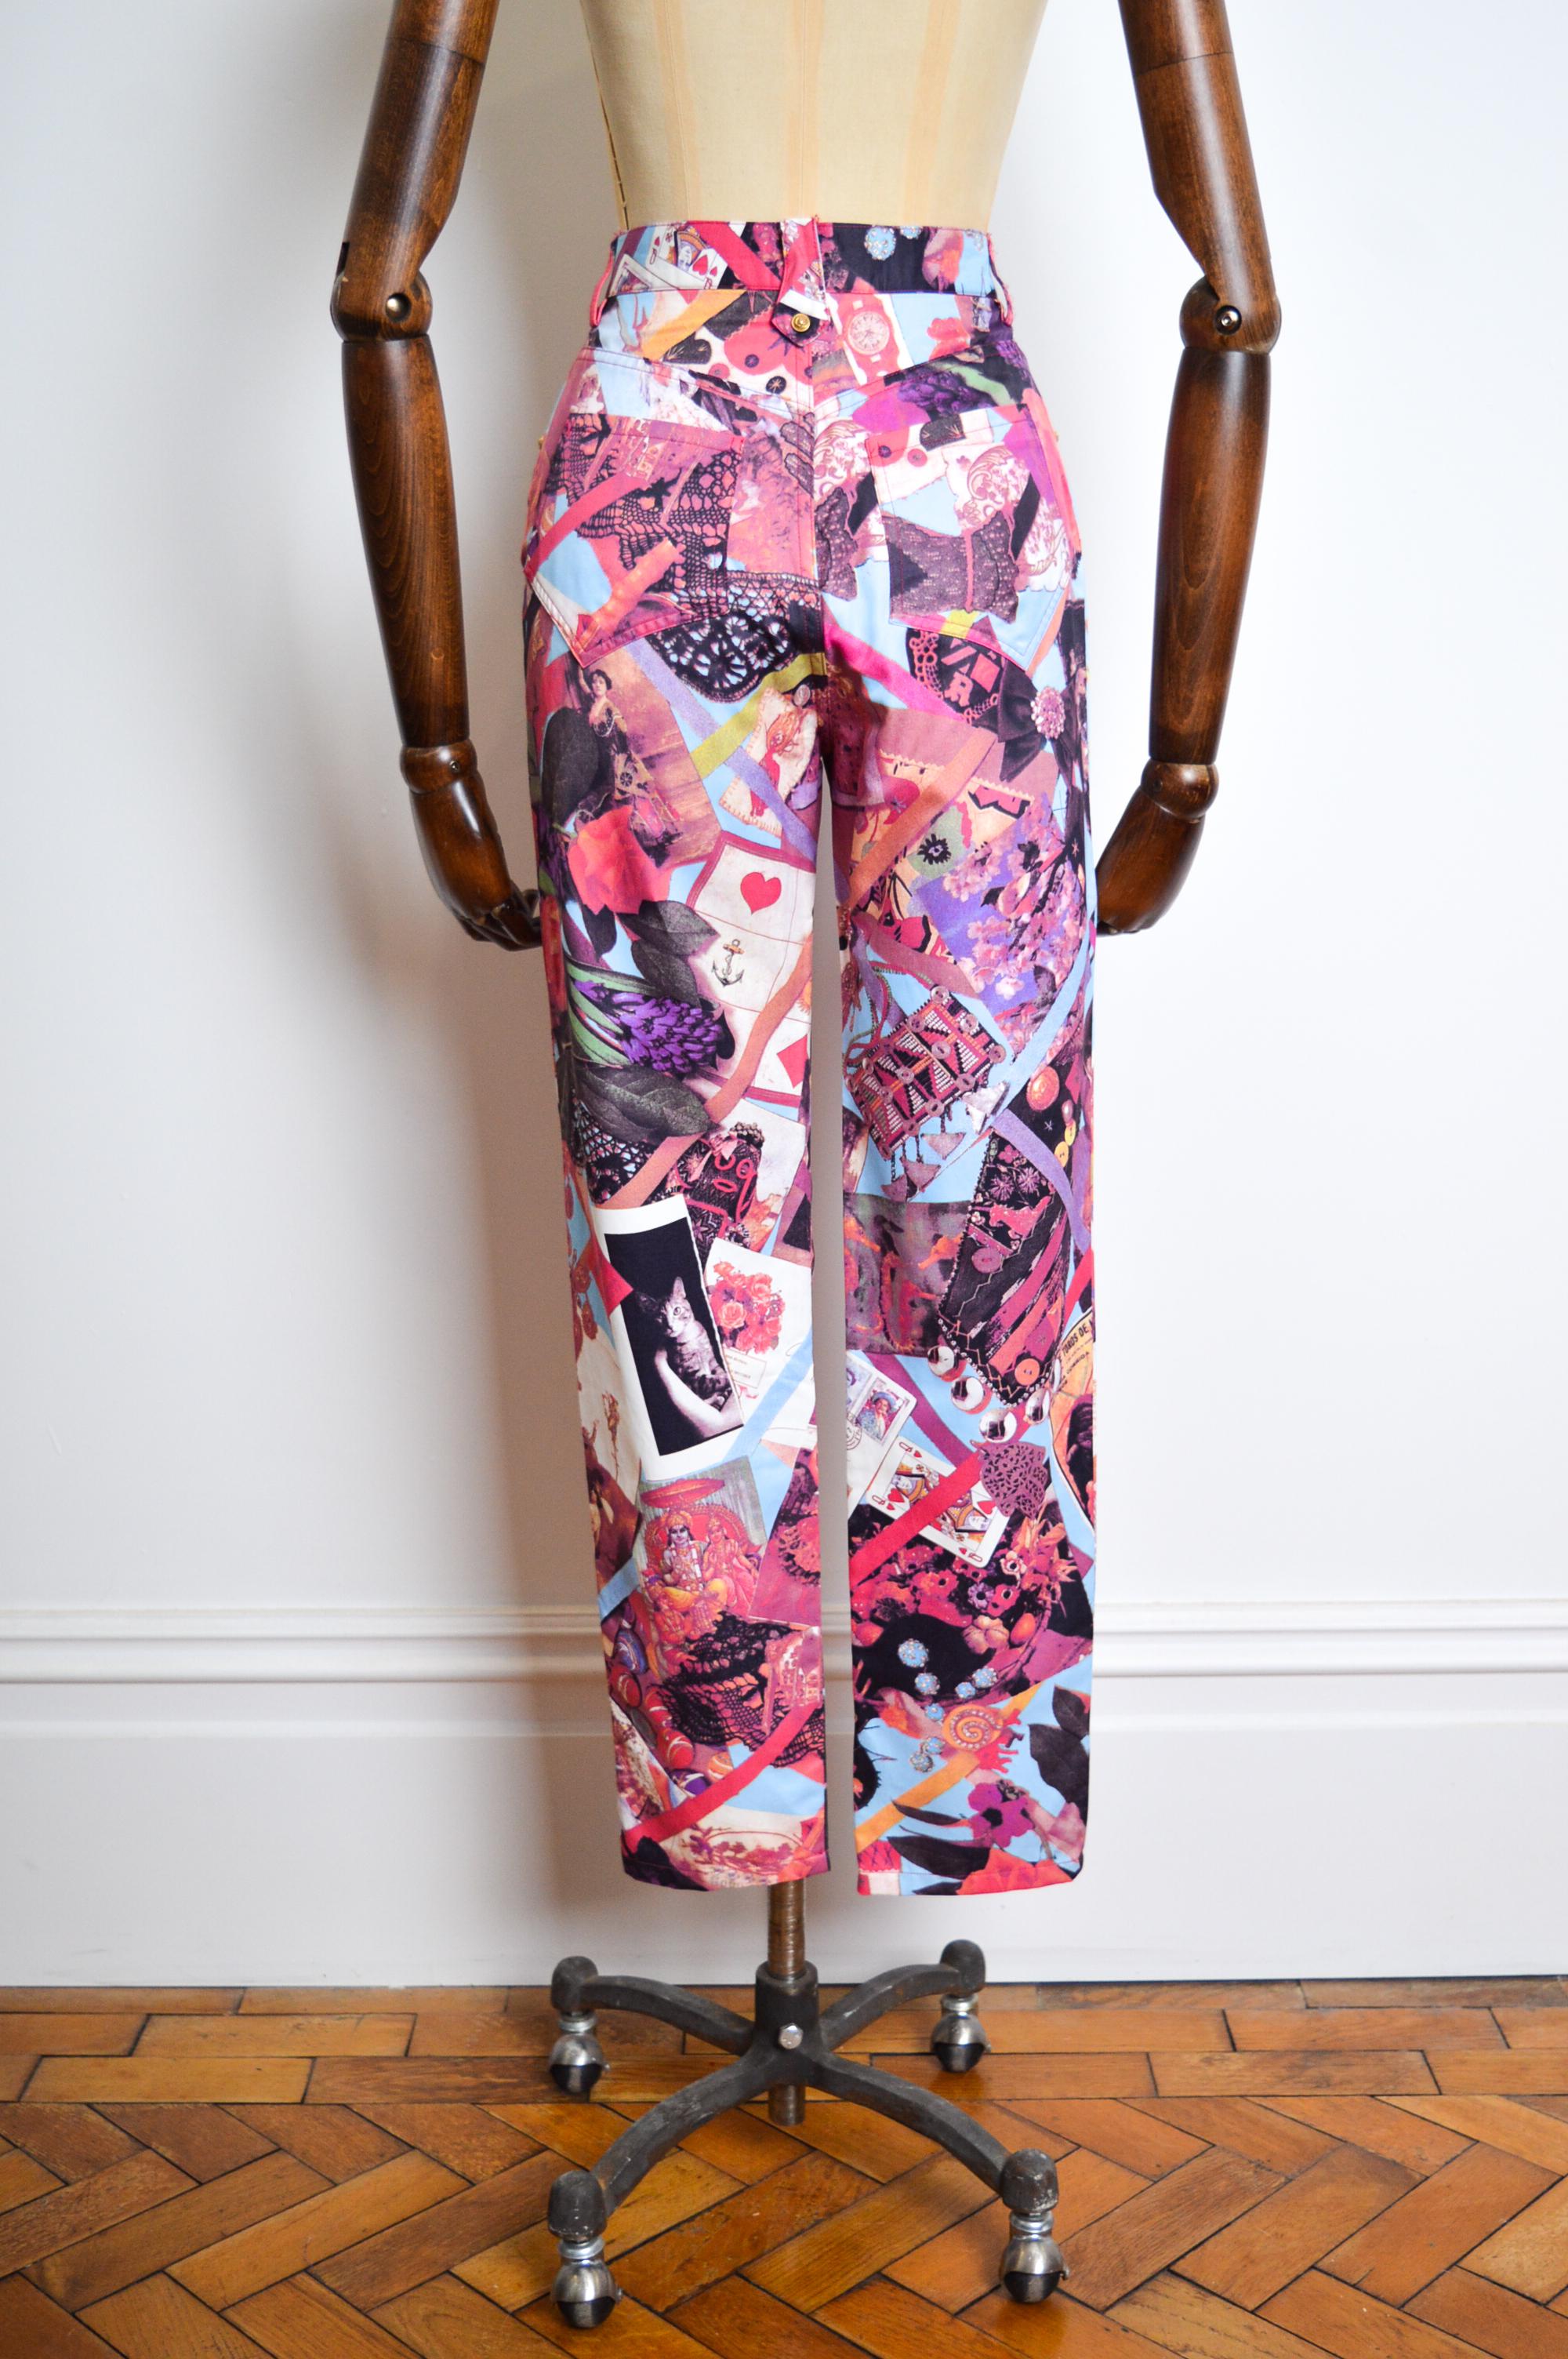 90s Vintage Christian Lacroix Hot Pink High Waisted Photograph Print Jeans Pants 7